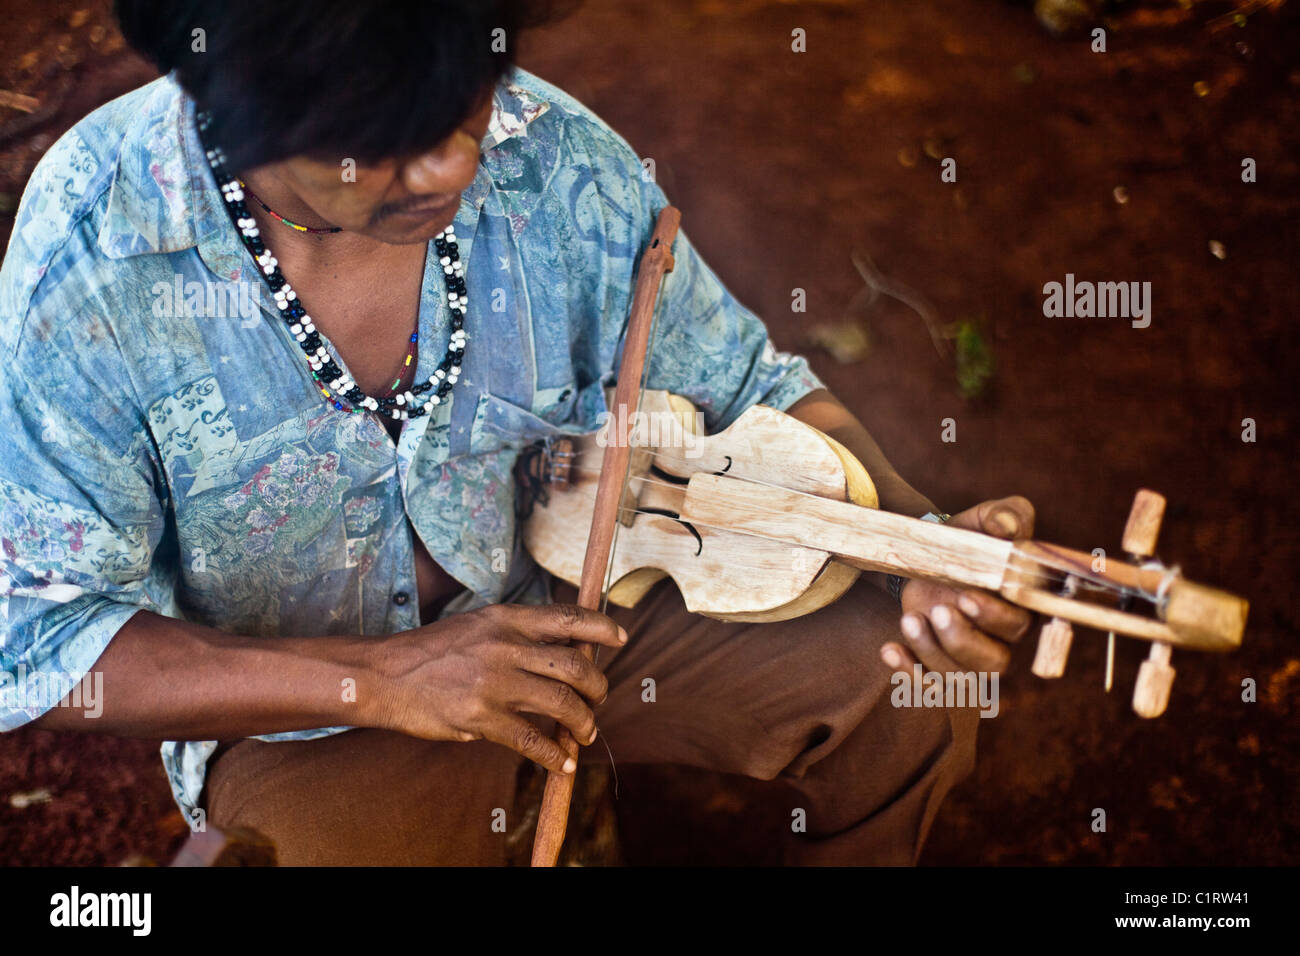 Mbya Guarani craftsman and musician from Misiones, Argentina, playing traditional music on violin (rabe). Stock Photo